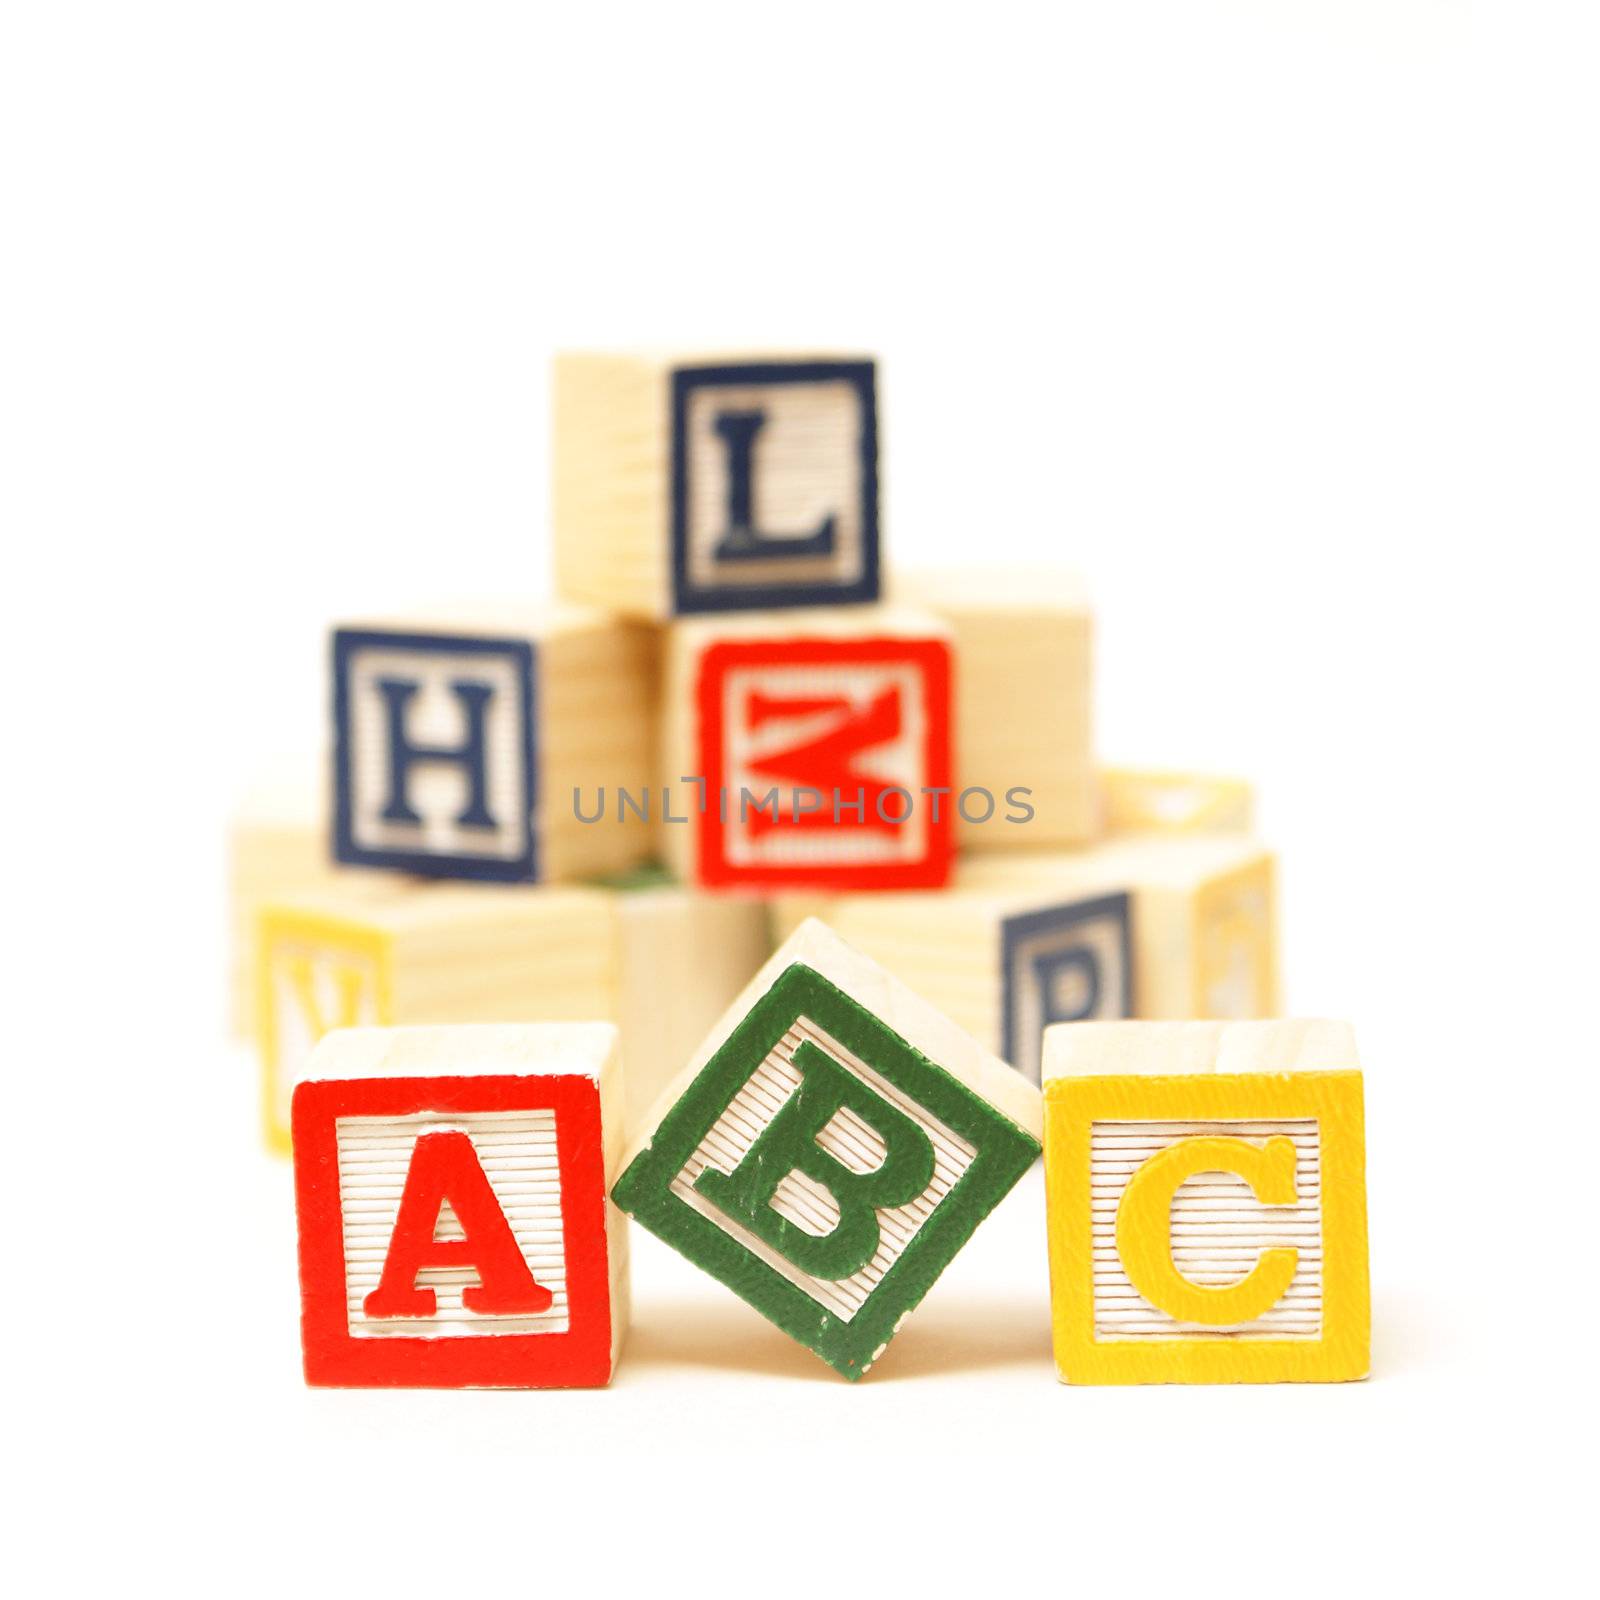 Fundamentals to any early childhood education starts with the alphabet.